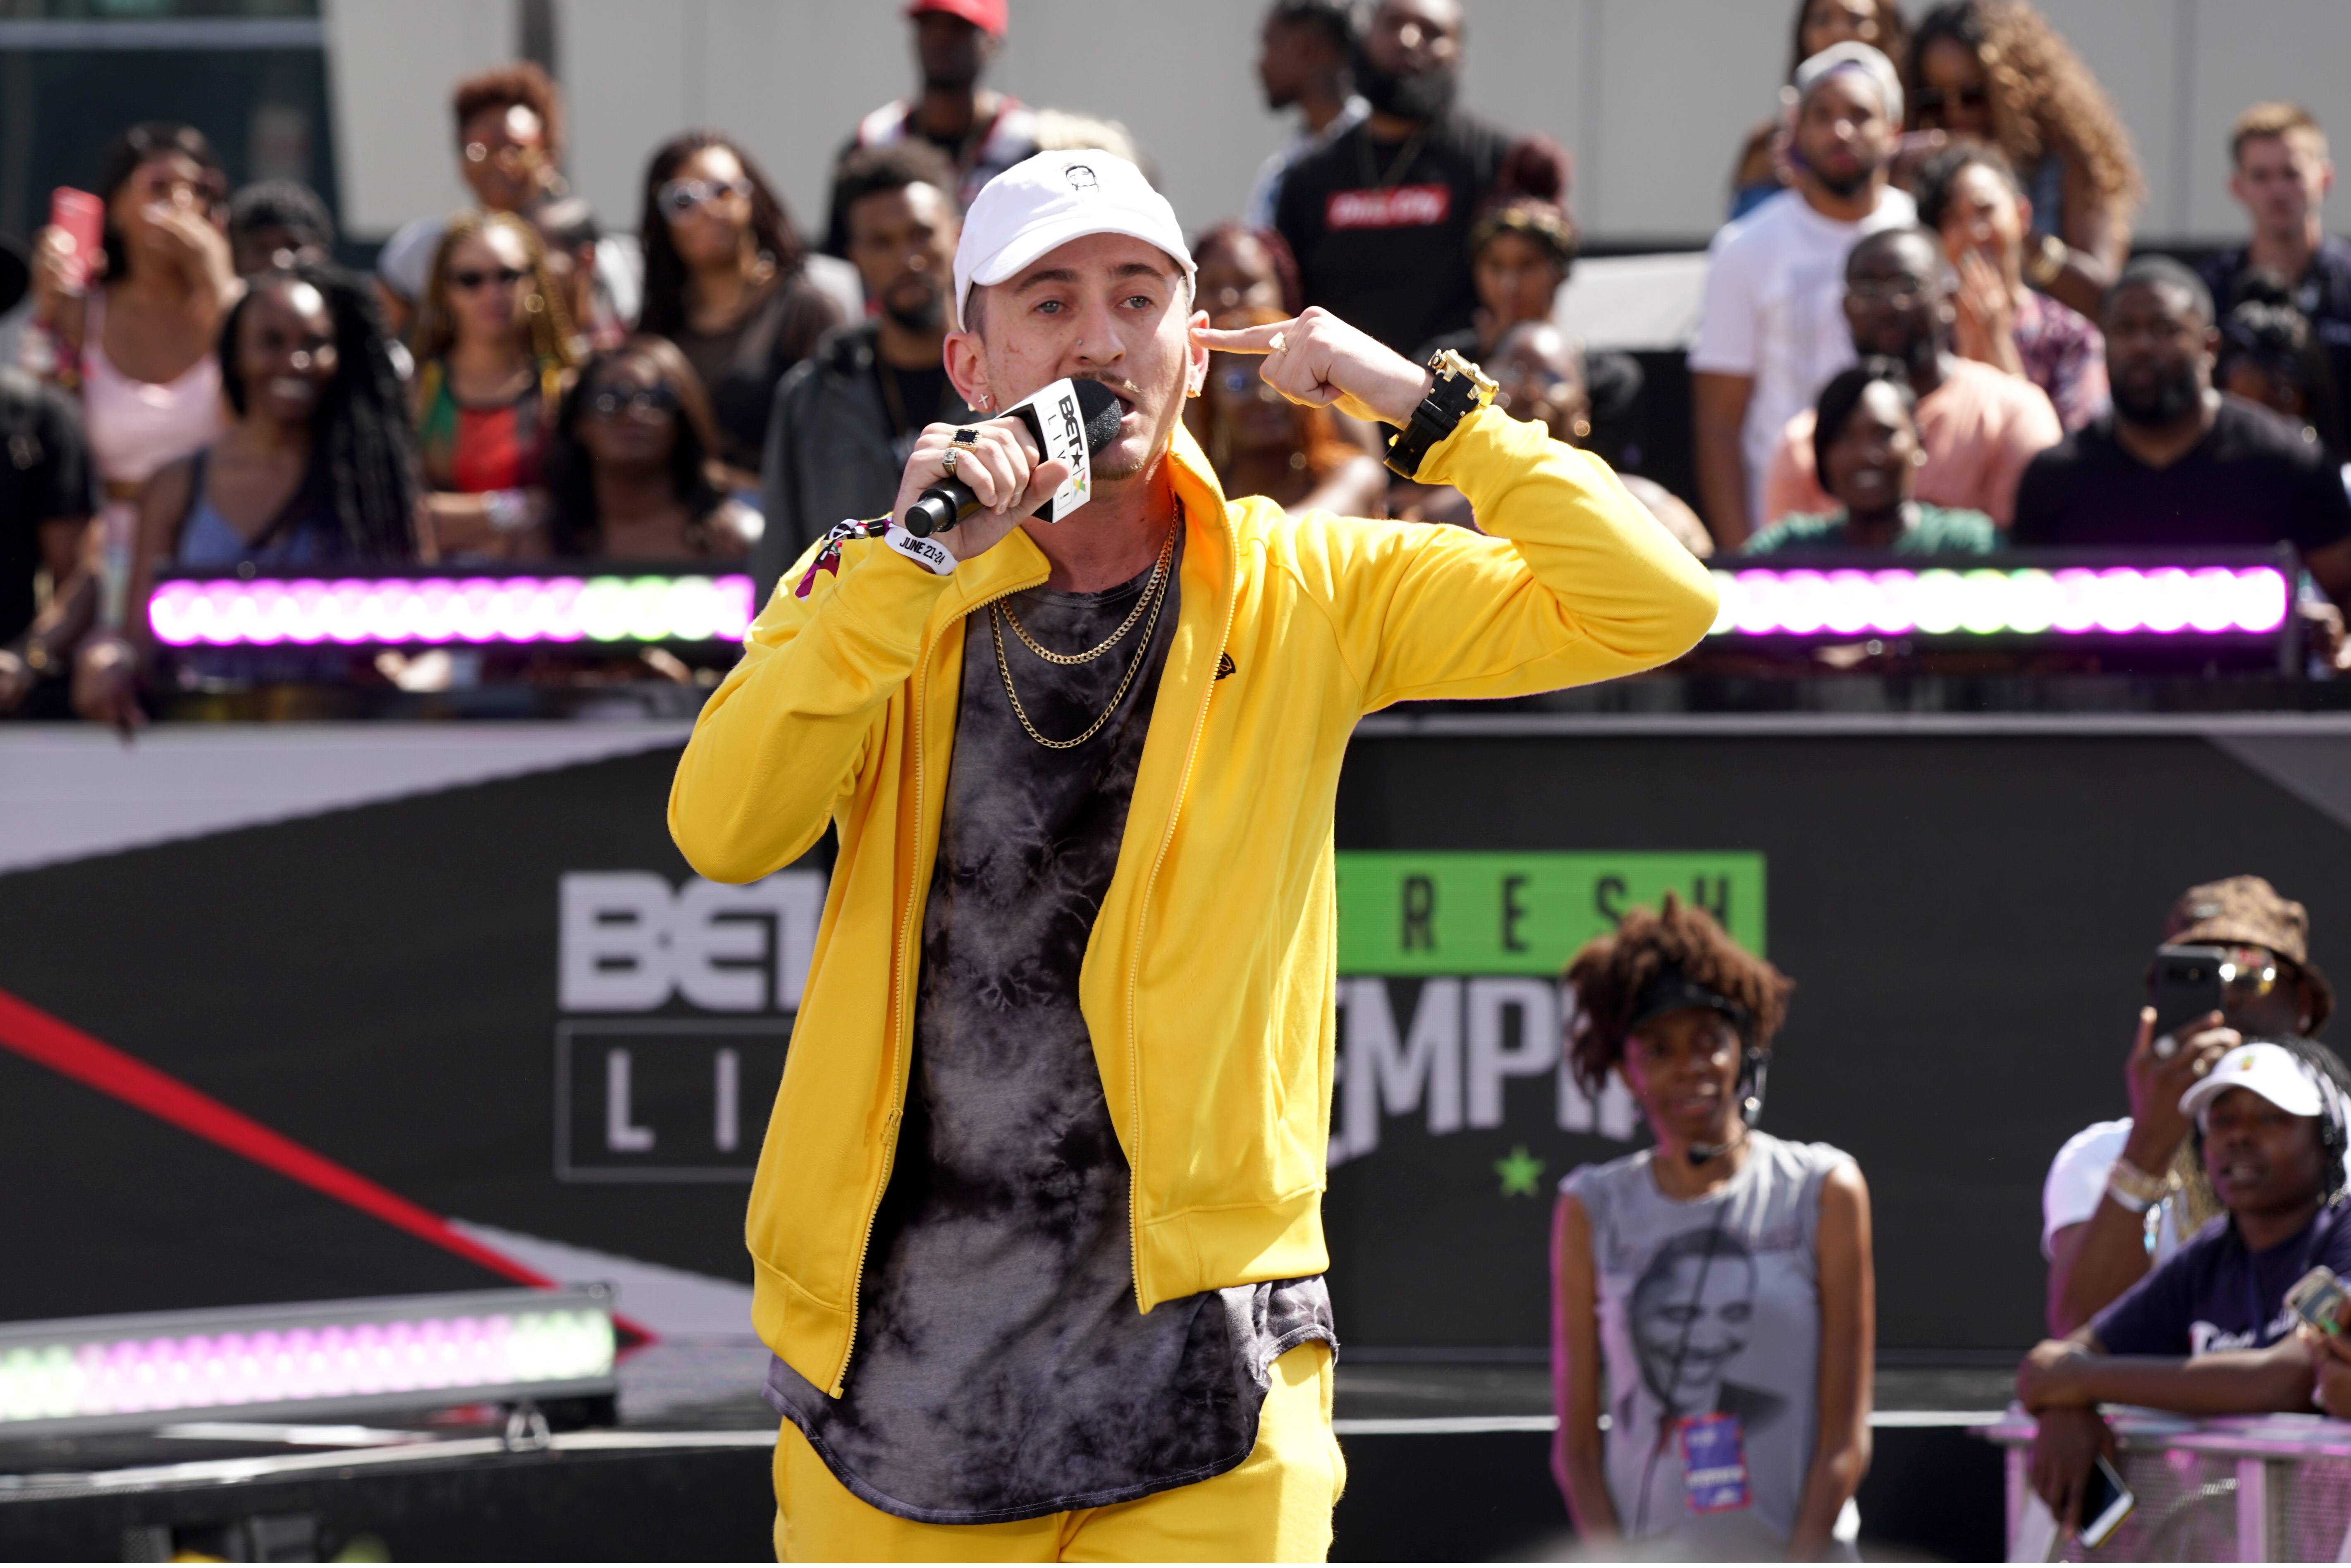 Check Out What Went Down With The BETX Live Freestyle!